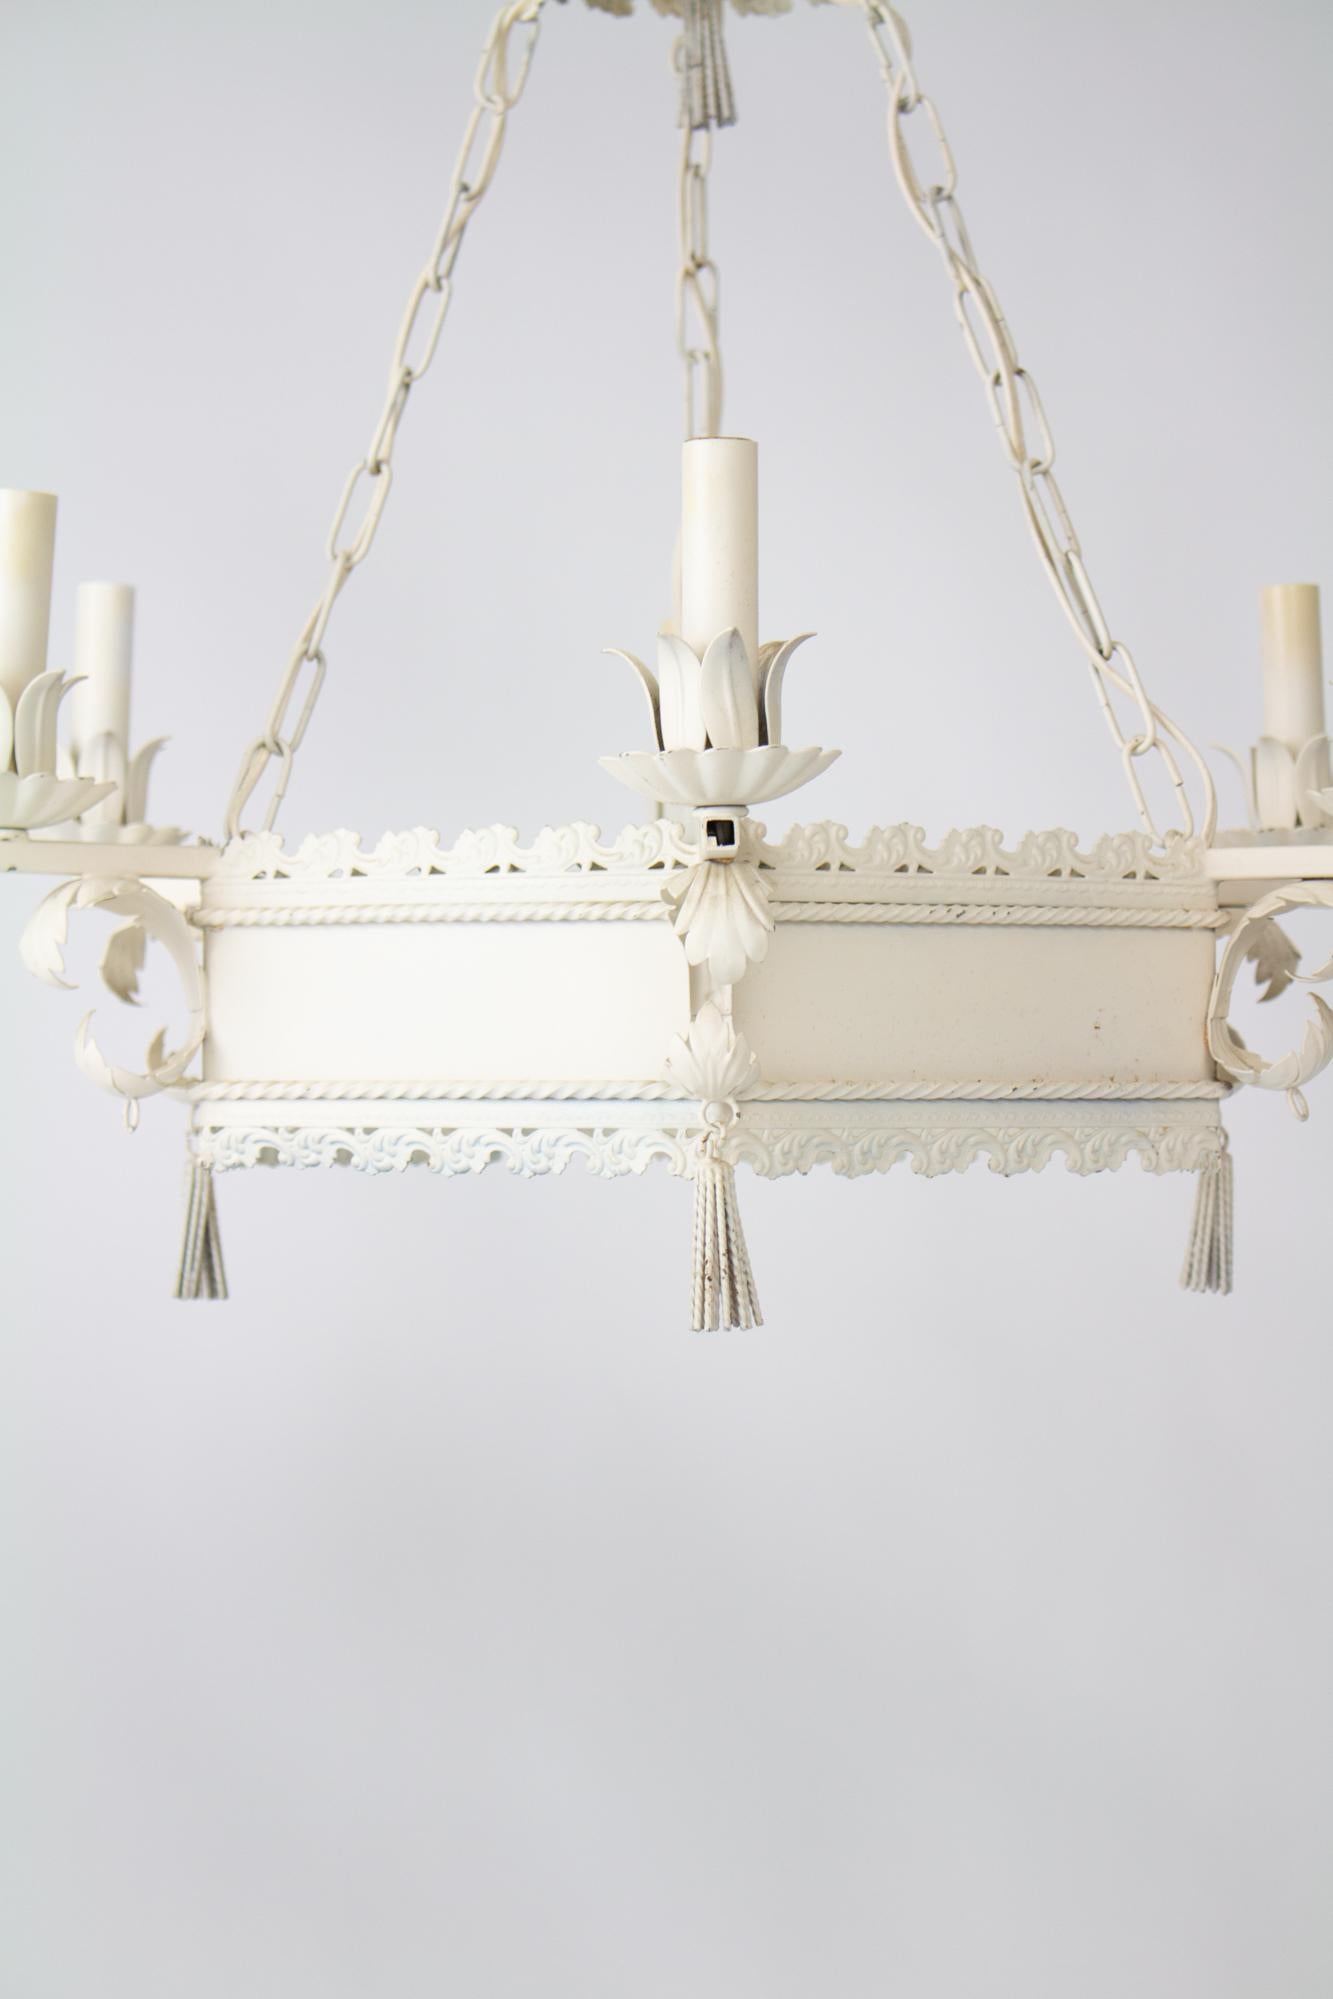 Mid 20th Century white tole chandelier. Hexagonal open body with six lights hangs from a top crown by three chains. Three tassels hang below. White painted finish with some wear and signs of rust. Sold as-is and needs to be rewired. 

Italian, Mid